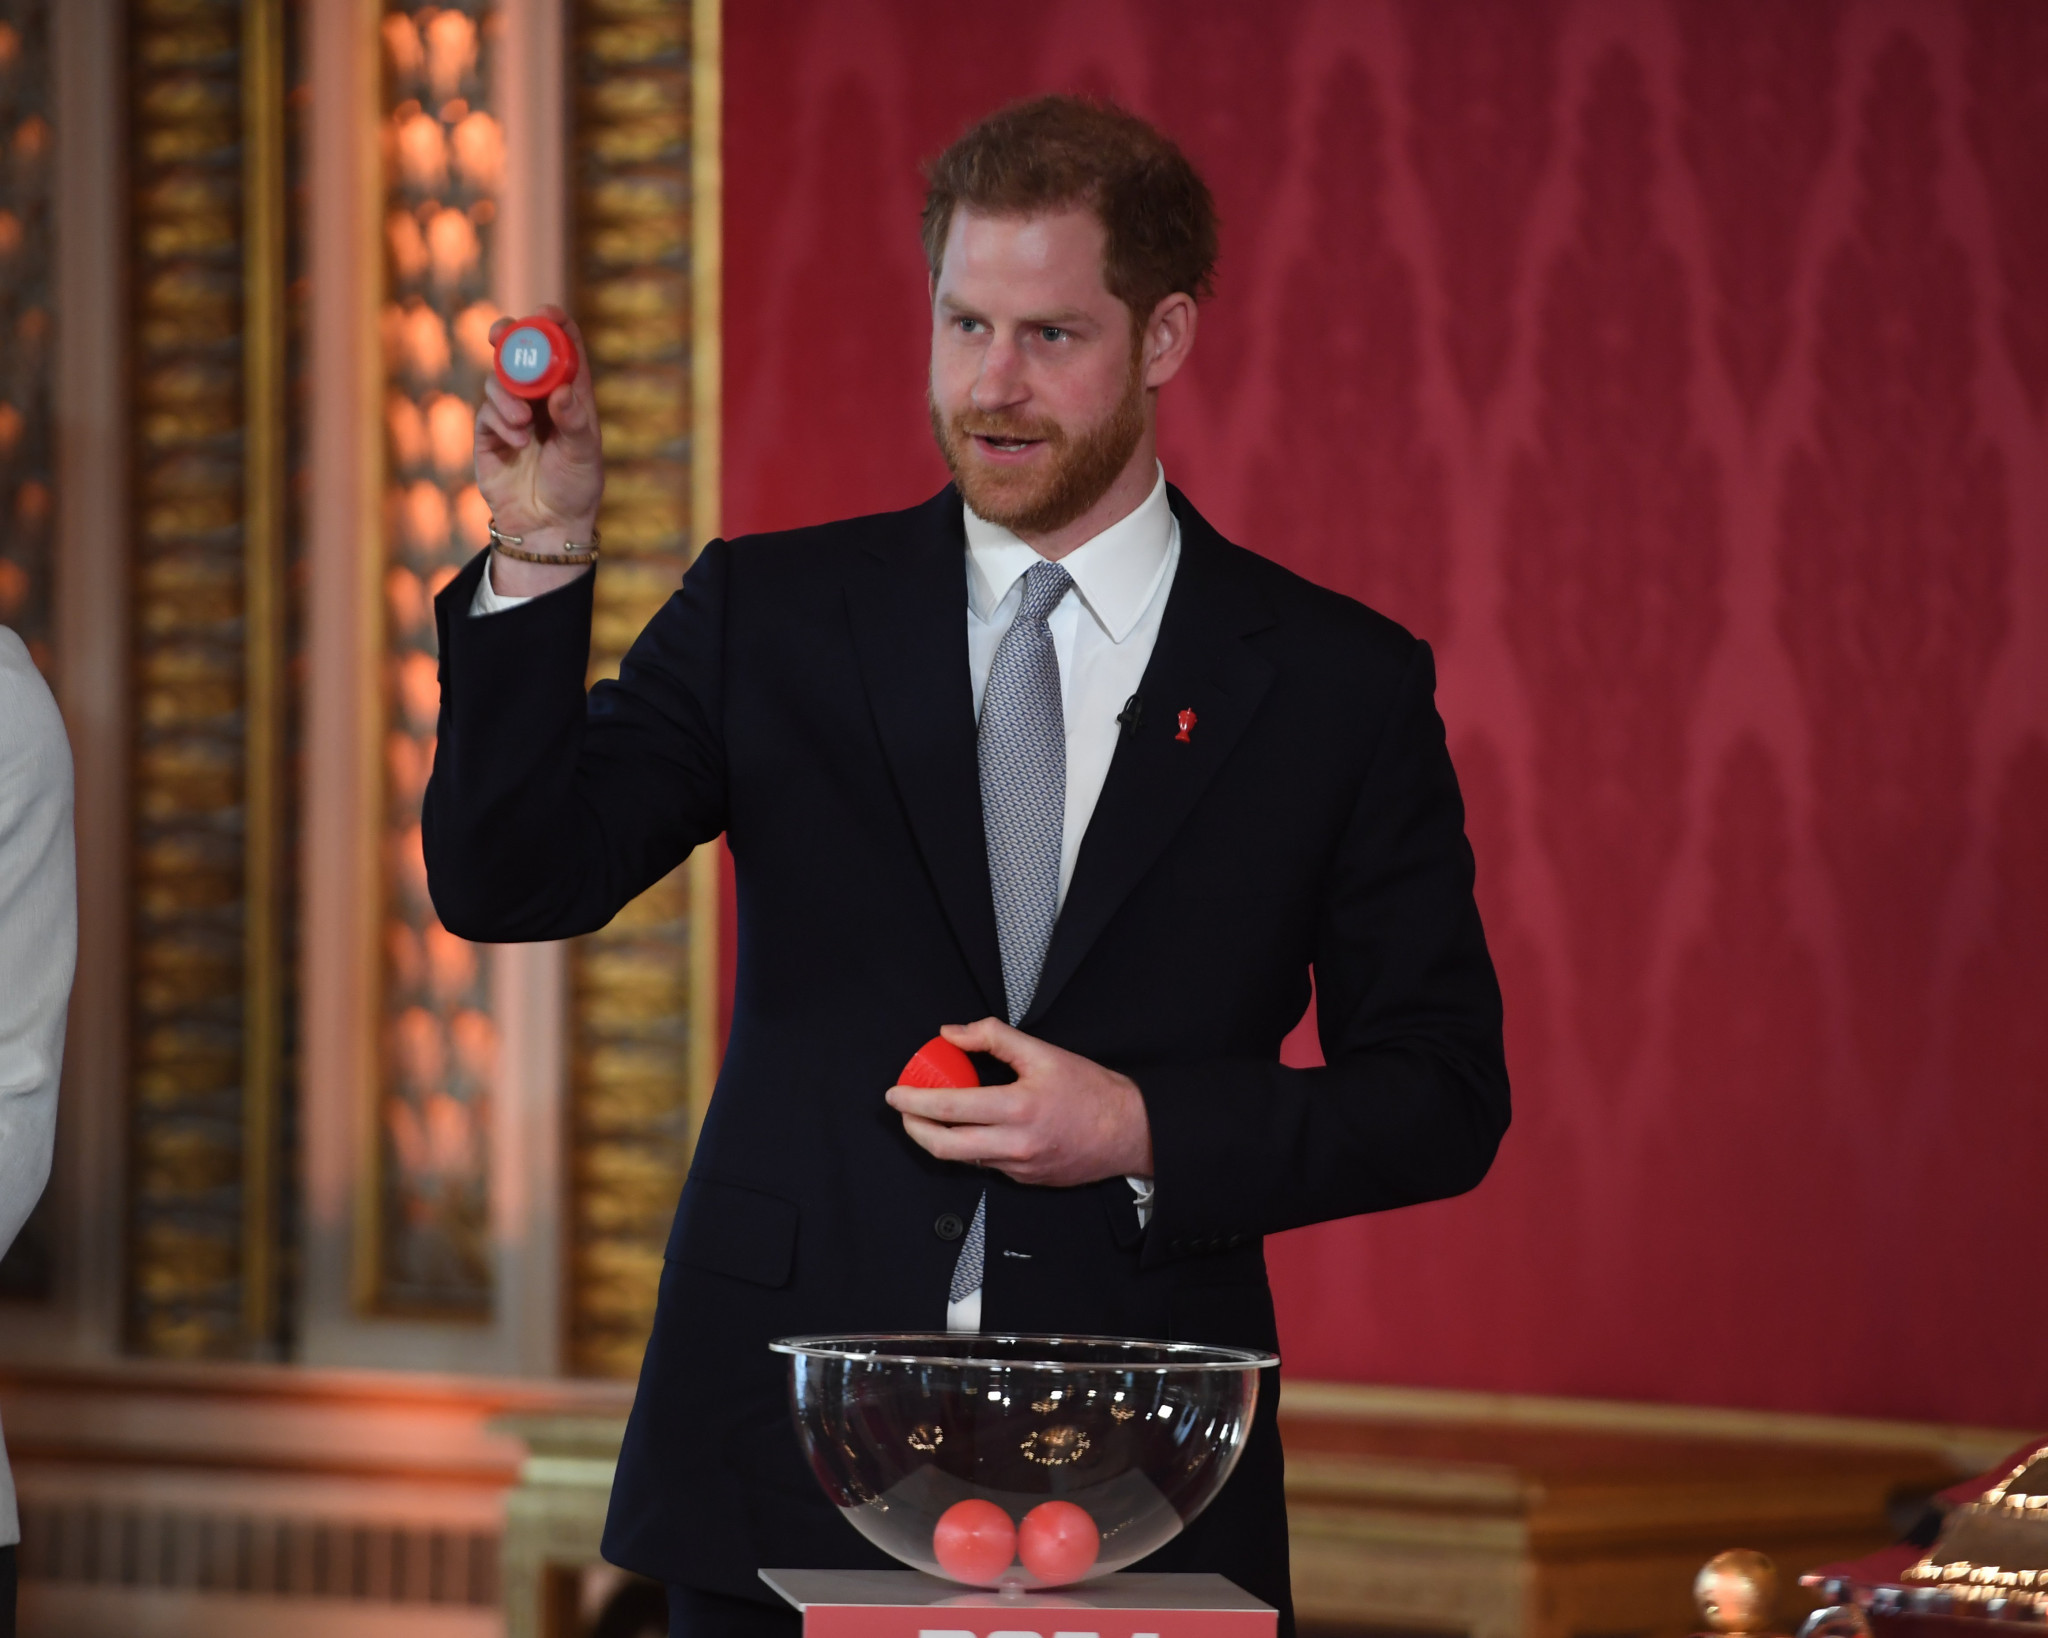 Prince Harry conducted the 2021 Rugby League World Cup draw at Buckingham Palace ©Getty Images